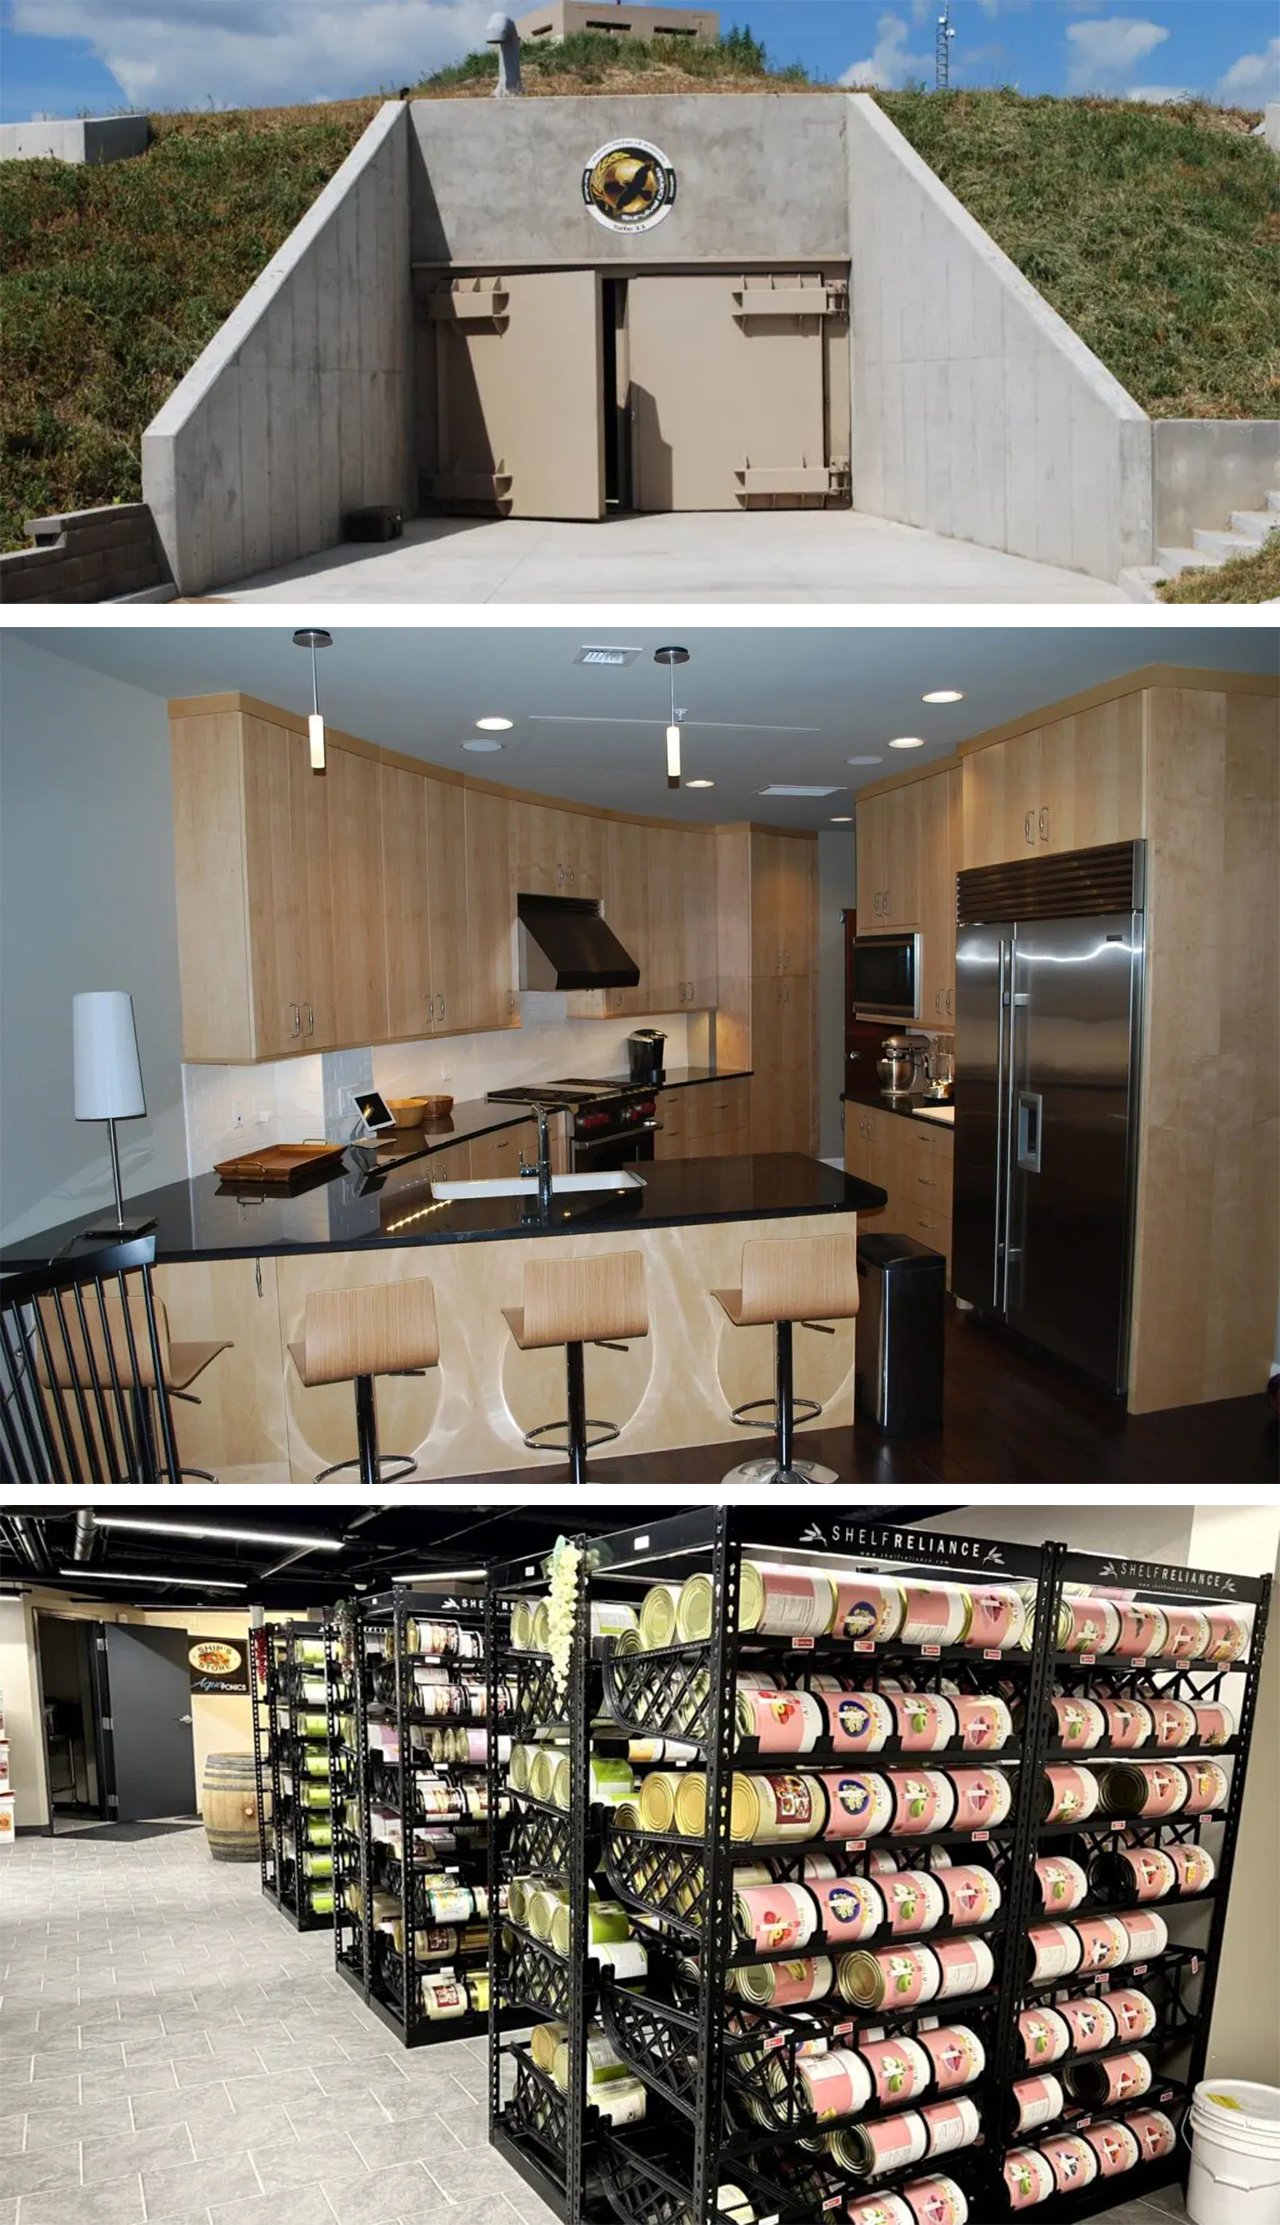 A collage of three images of a bunker apartment complex. The first image is an exterior shot of the missile silo bunker. It is a concrete structure with a sloping roof and a circular logo. The missile silo is built into a hill and has grass growing on the roof. The second image is an interior shot of the kitchen. It has wooden cabinets and a large island with a sink and a cooktop. There are stainless steel appliances and a kitchen counter with chairs. The third image is an interior shot of a prepping storage with survival food in cans. It has black metal racks for storing the food cans. The floor is made of stone tiles.